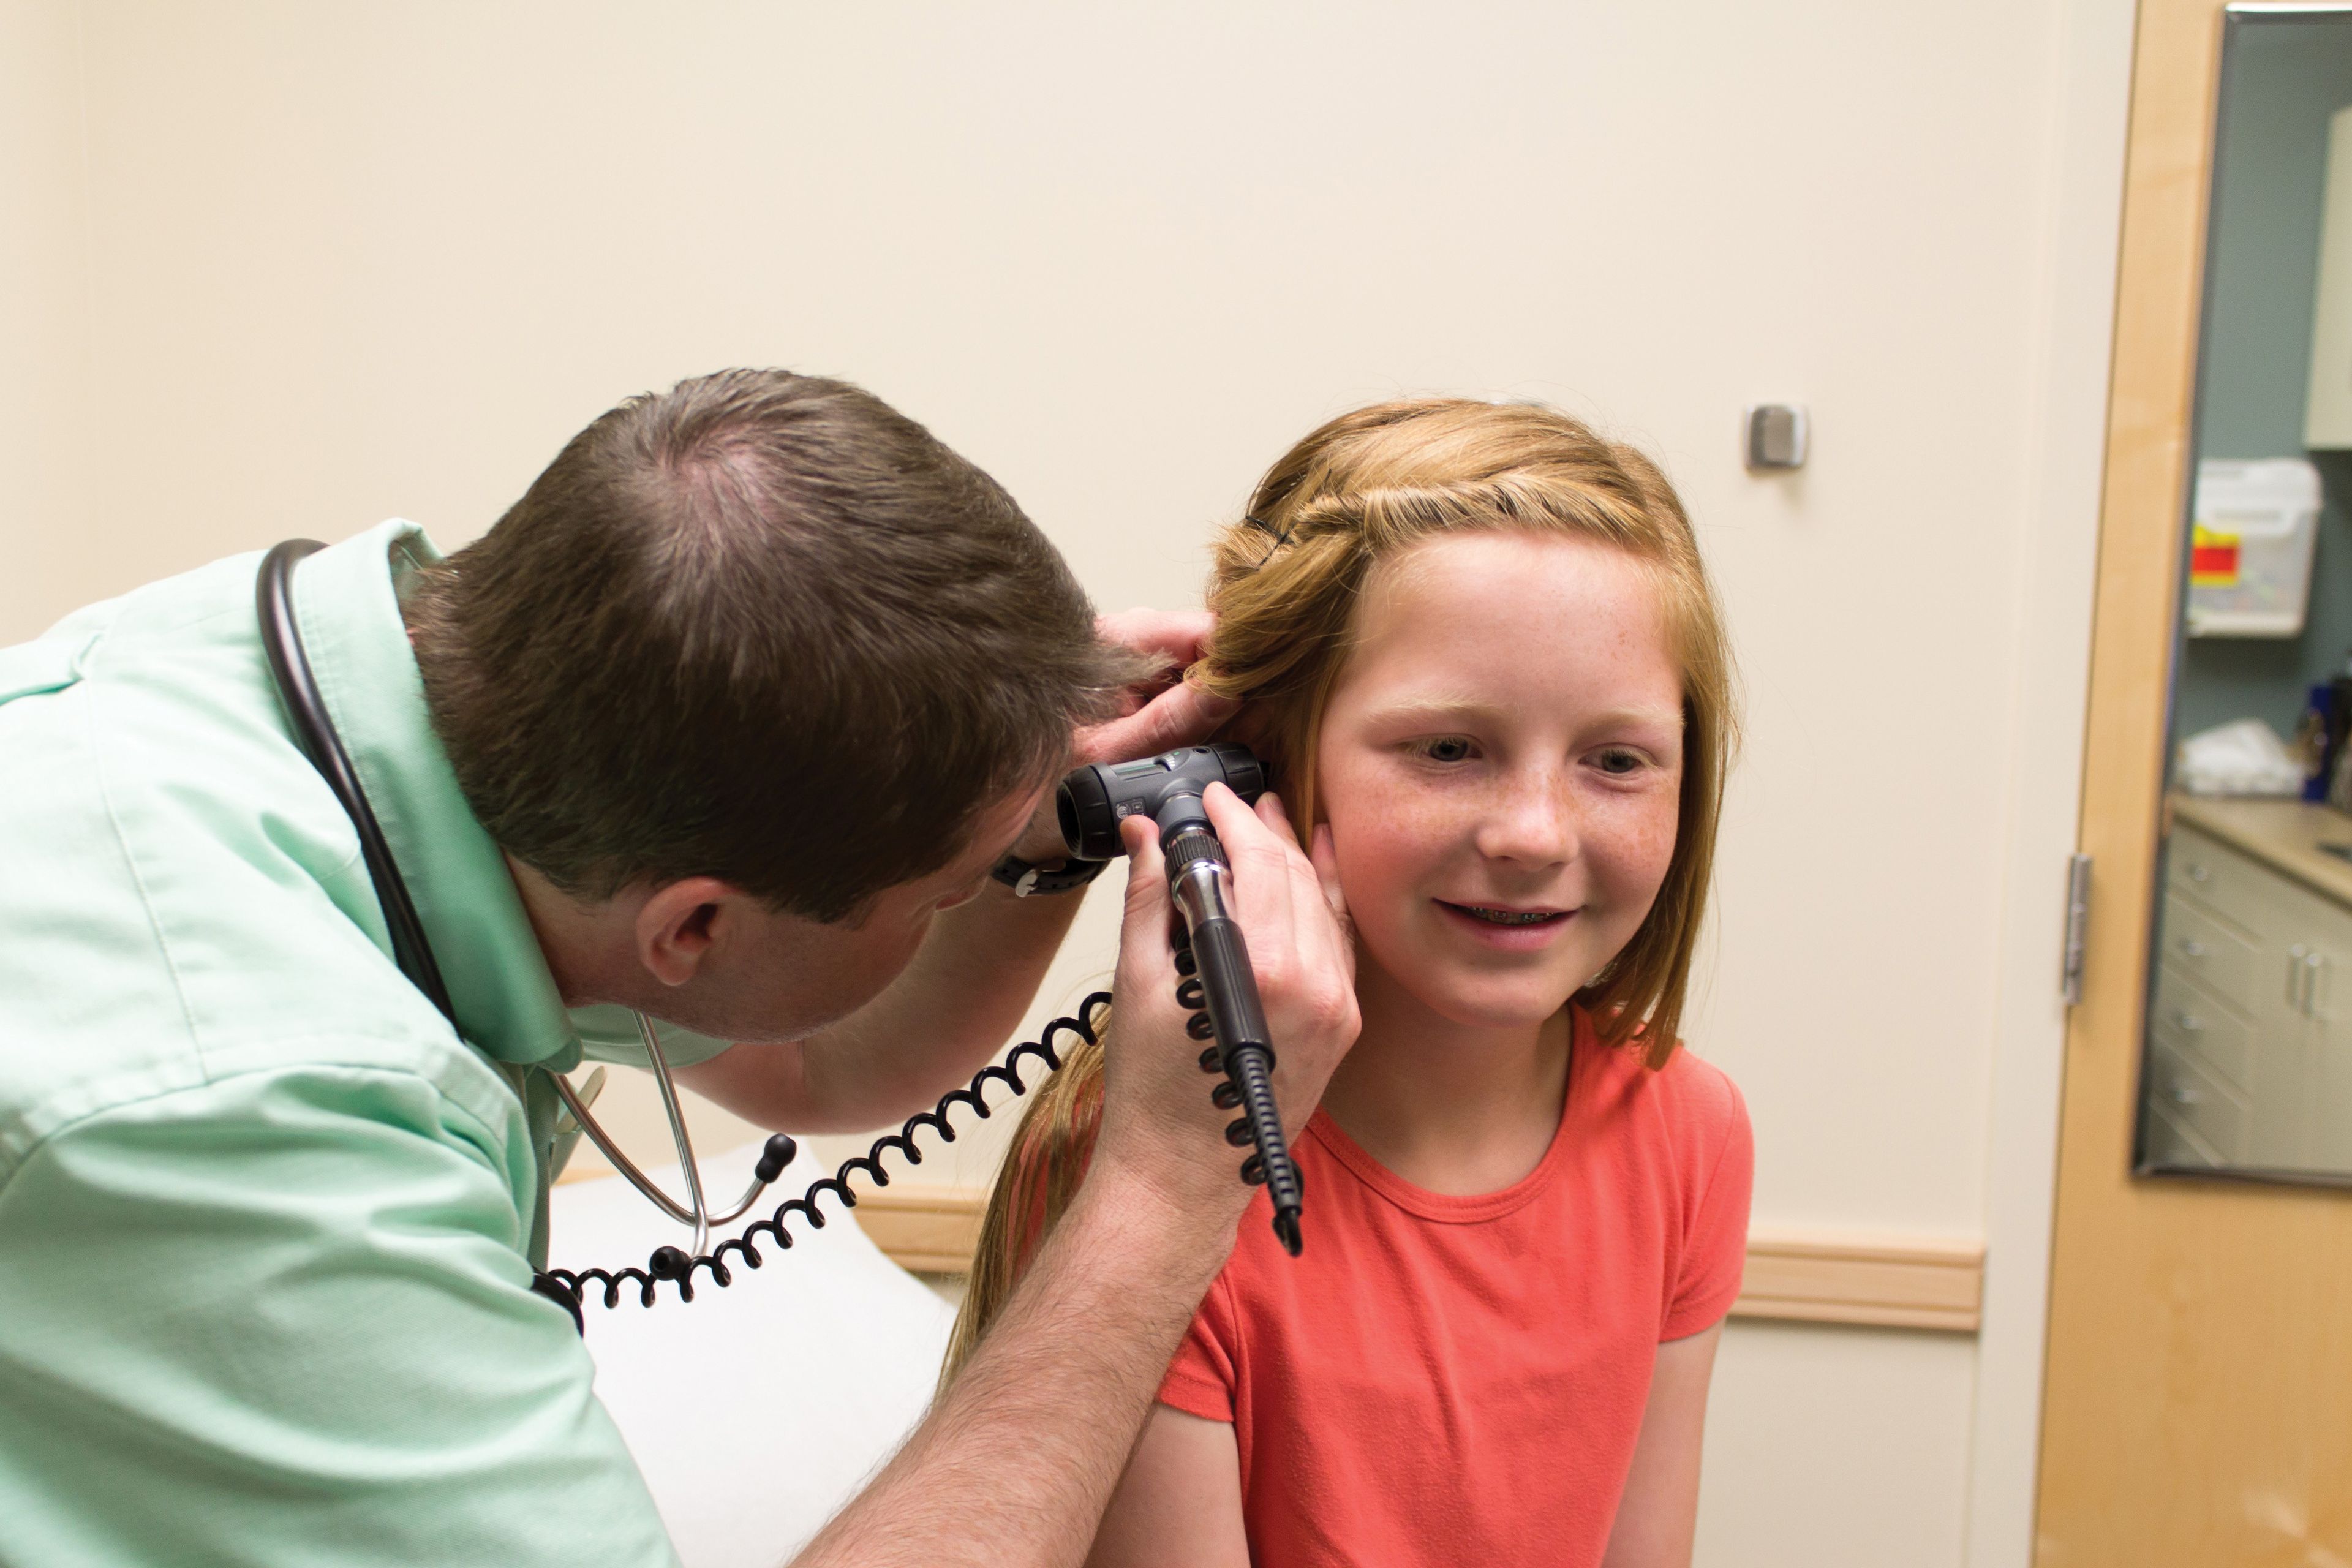 A doctor examining the ear of a young girl.